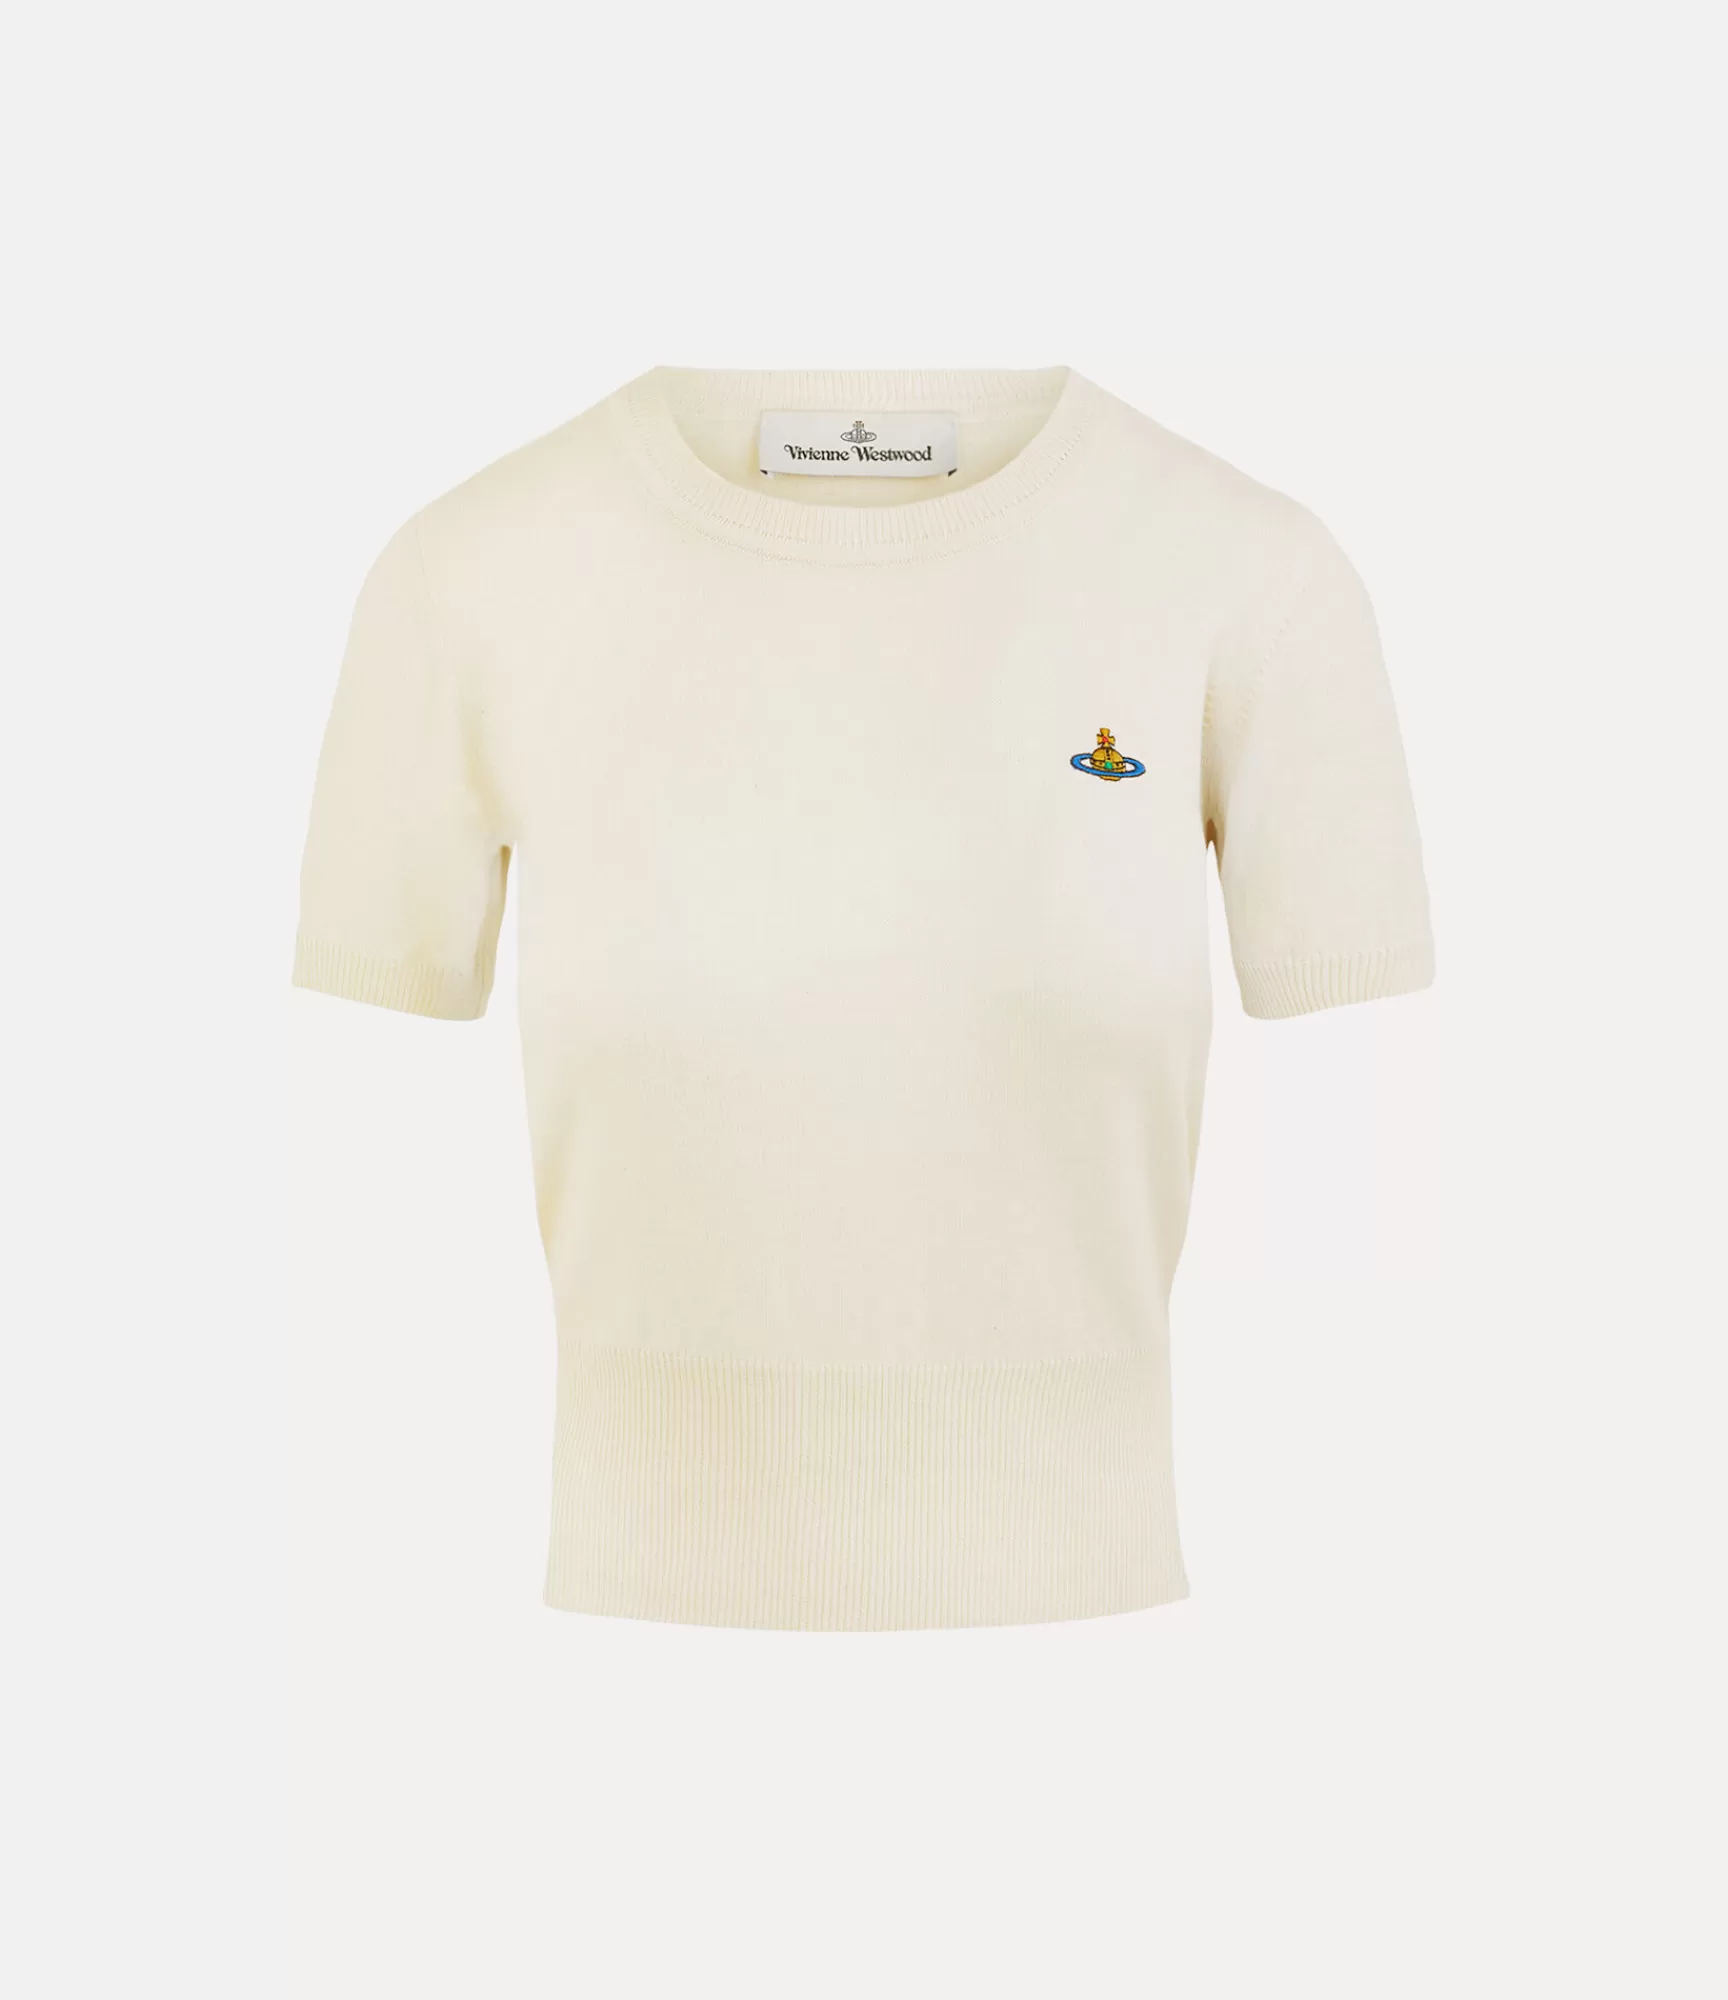 Vivienne Westwood Tops and Shirts | Knitwear*Bea top Cream